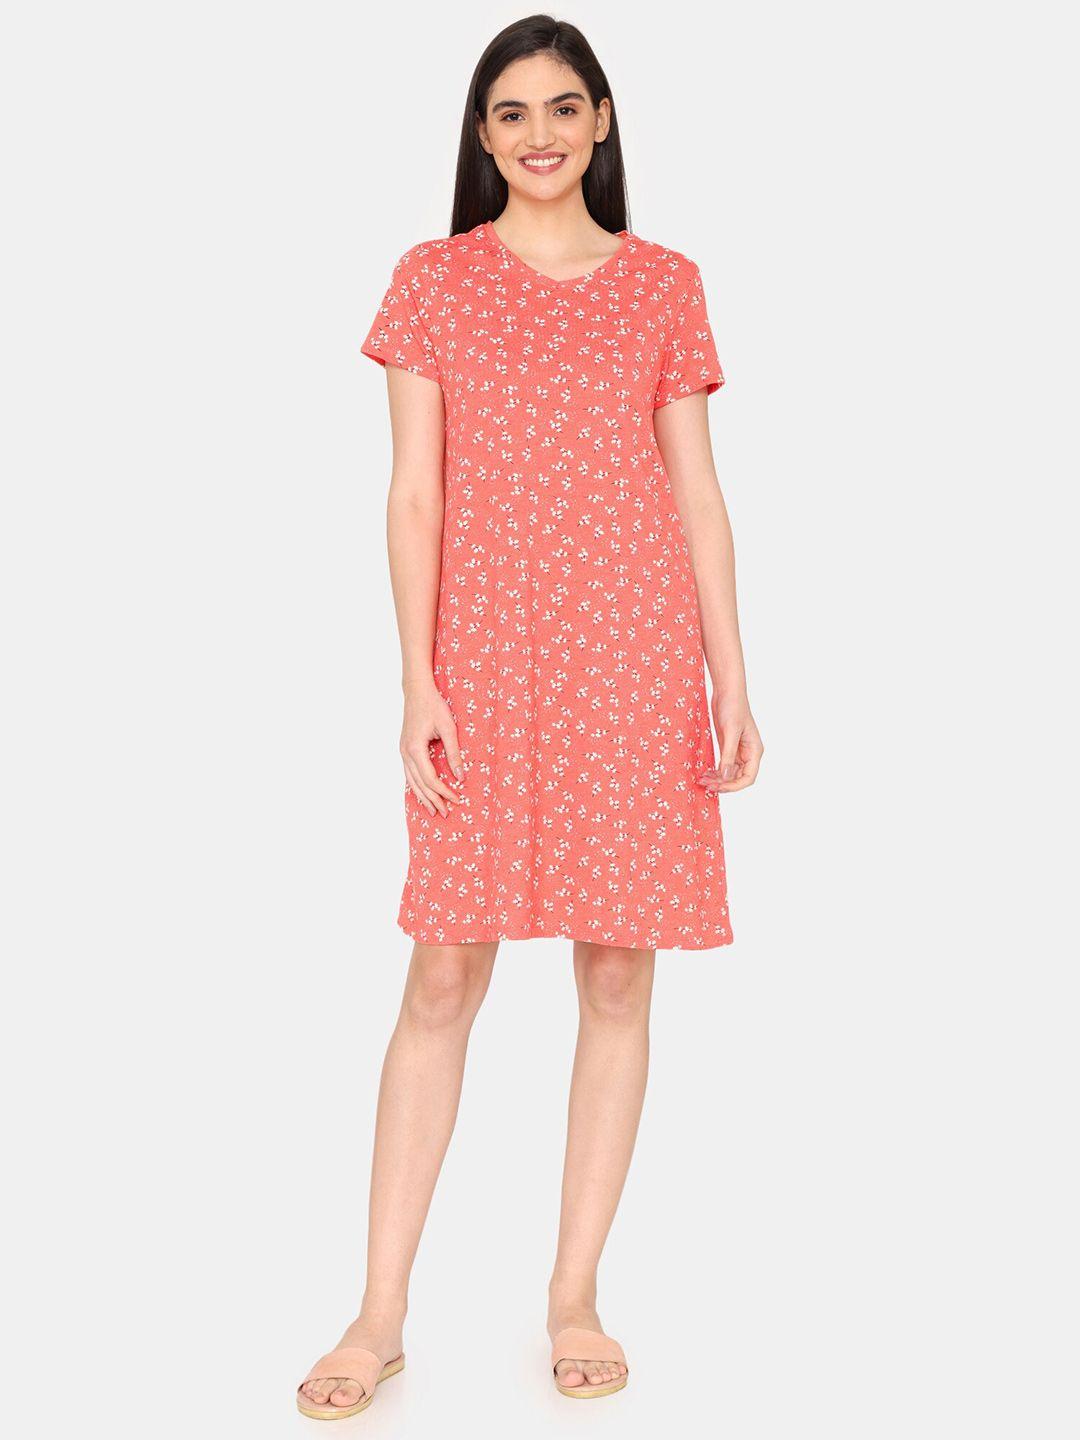 Rosaline by Zivame Floral Printed T-shirt Nightdress